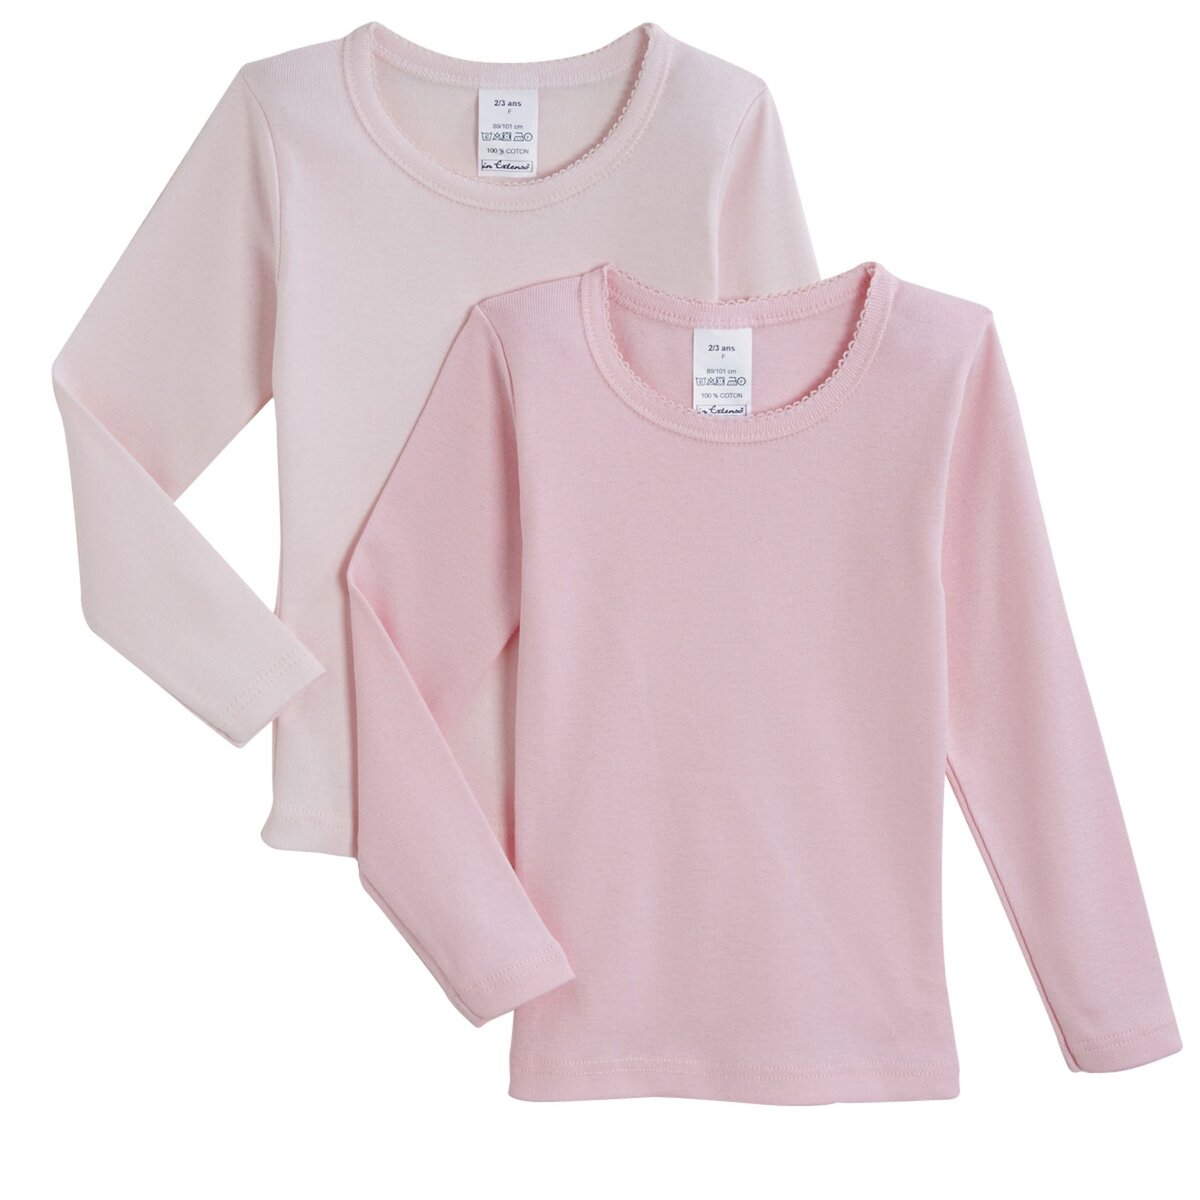 IN EXTENSO Lot de 2 tee-shirts manches longues unis fille